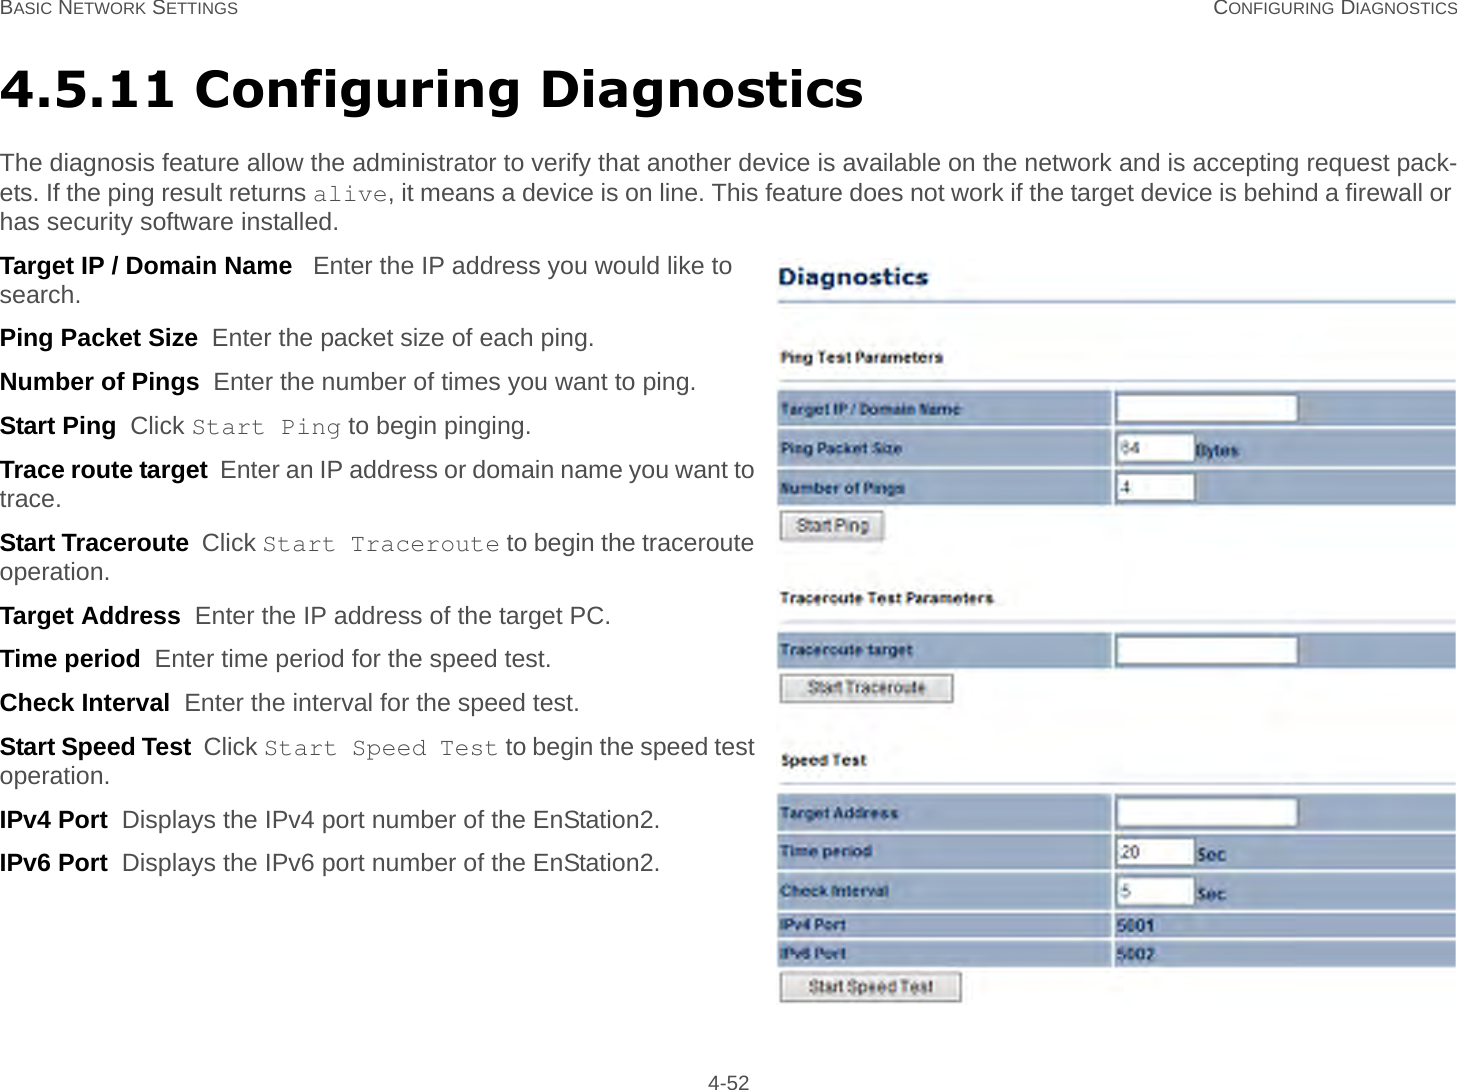 BASIC NETWORK SETTINGS CONFIGURING DIAGNOSTICS 4-524.5.11 Configuring DiagnosticsThe diagnosis feature allow the administrator to verify that another device is available on the network and is accepting request pack-ets. If the ping result returns alive, it means a device is on line. This feature does not work if the target device is behind a firewall or has security software installed.Target IP / Domain Name   Enter the IP address you would like to search.Ping Packet Size  Enter the packet size of each ping.Number of Pings  Enter the number of times you want to ping.Start Ping  Click Start Ping to begin pinging.Trace route target  Enter an IP address or domain name you want to trace.Start Traceroute  Click Start Traceroute to begin the traceroute operation.Target Address  Enter the IP address of the target PC.Time period  Enter time period for the speed test.Check Interval  Enter the interval for the speed test.Start Speed Test  Click Start Speed Test to begin the speed test operation.IPv4 Port  Displays the IPv4 port number of the EnStation2.IPv6 Port  Displays the IPv6 port number of the EnStation2.